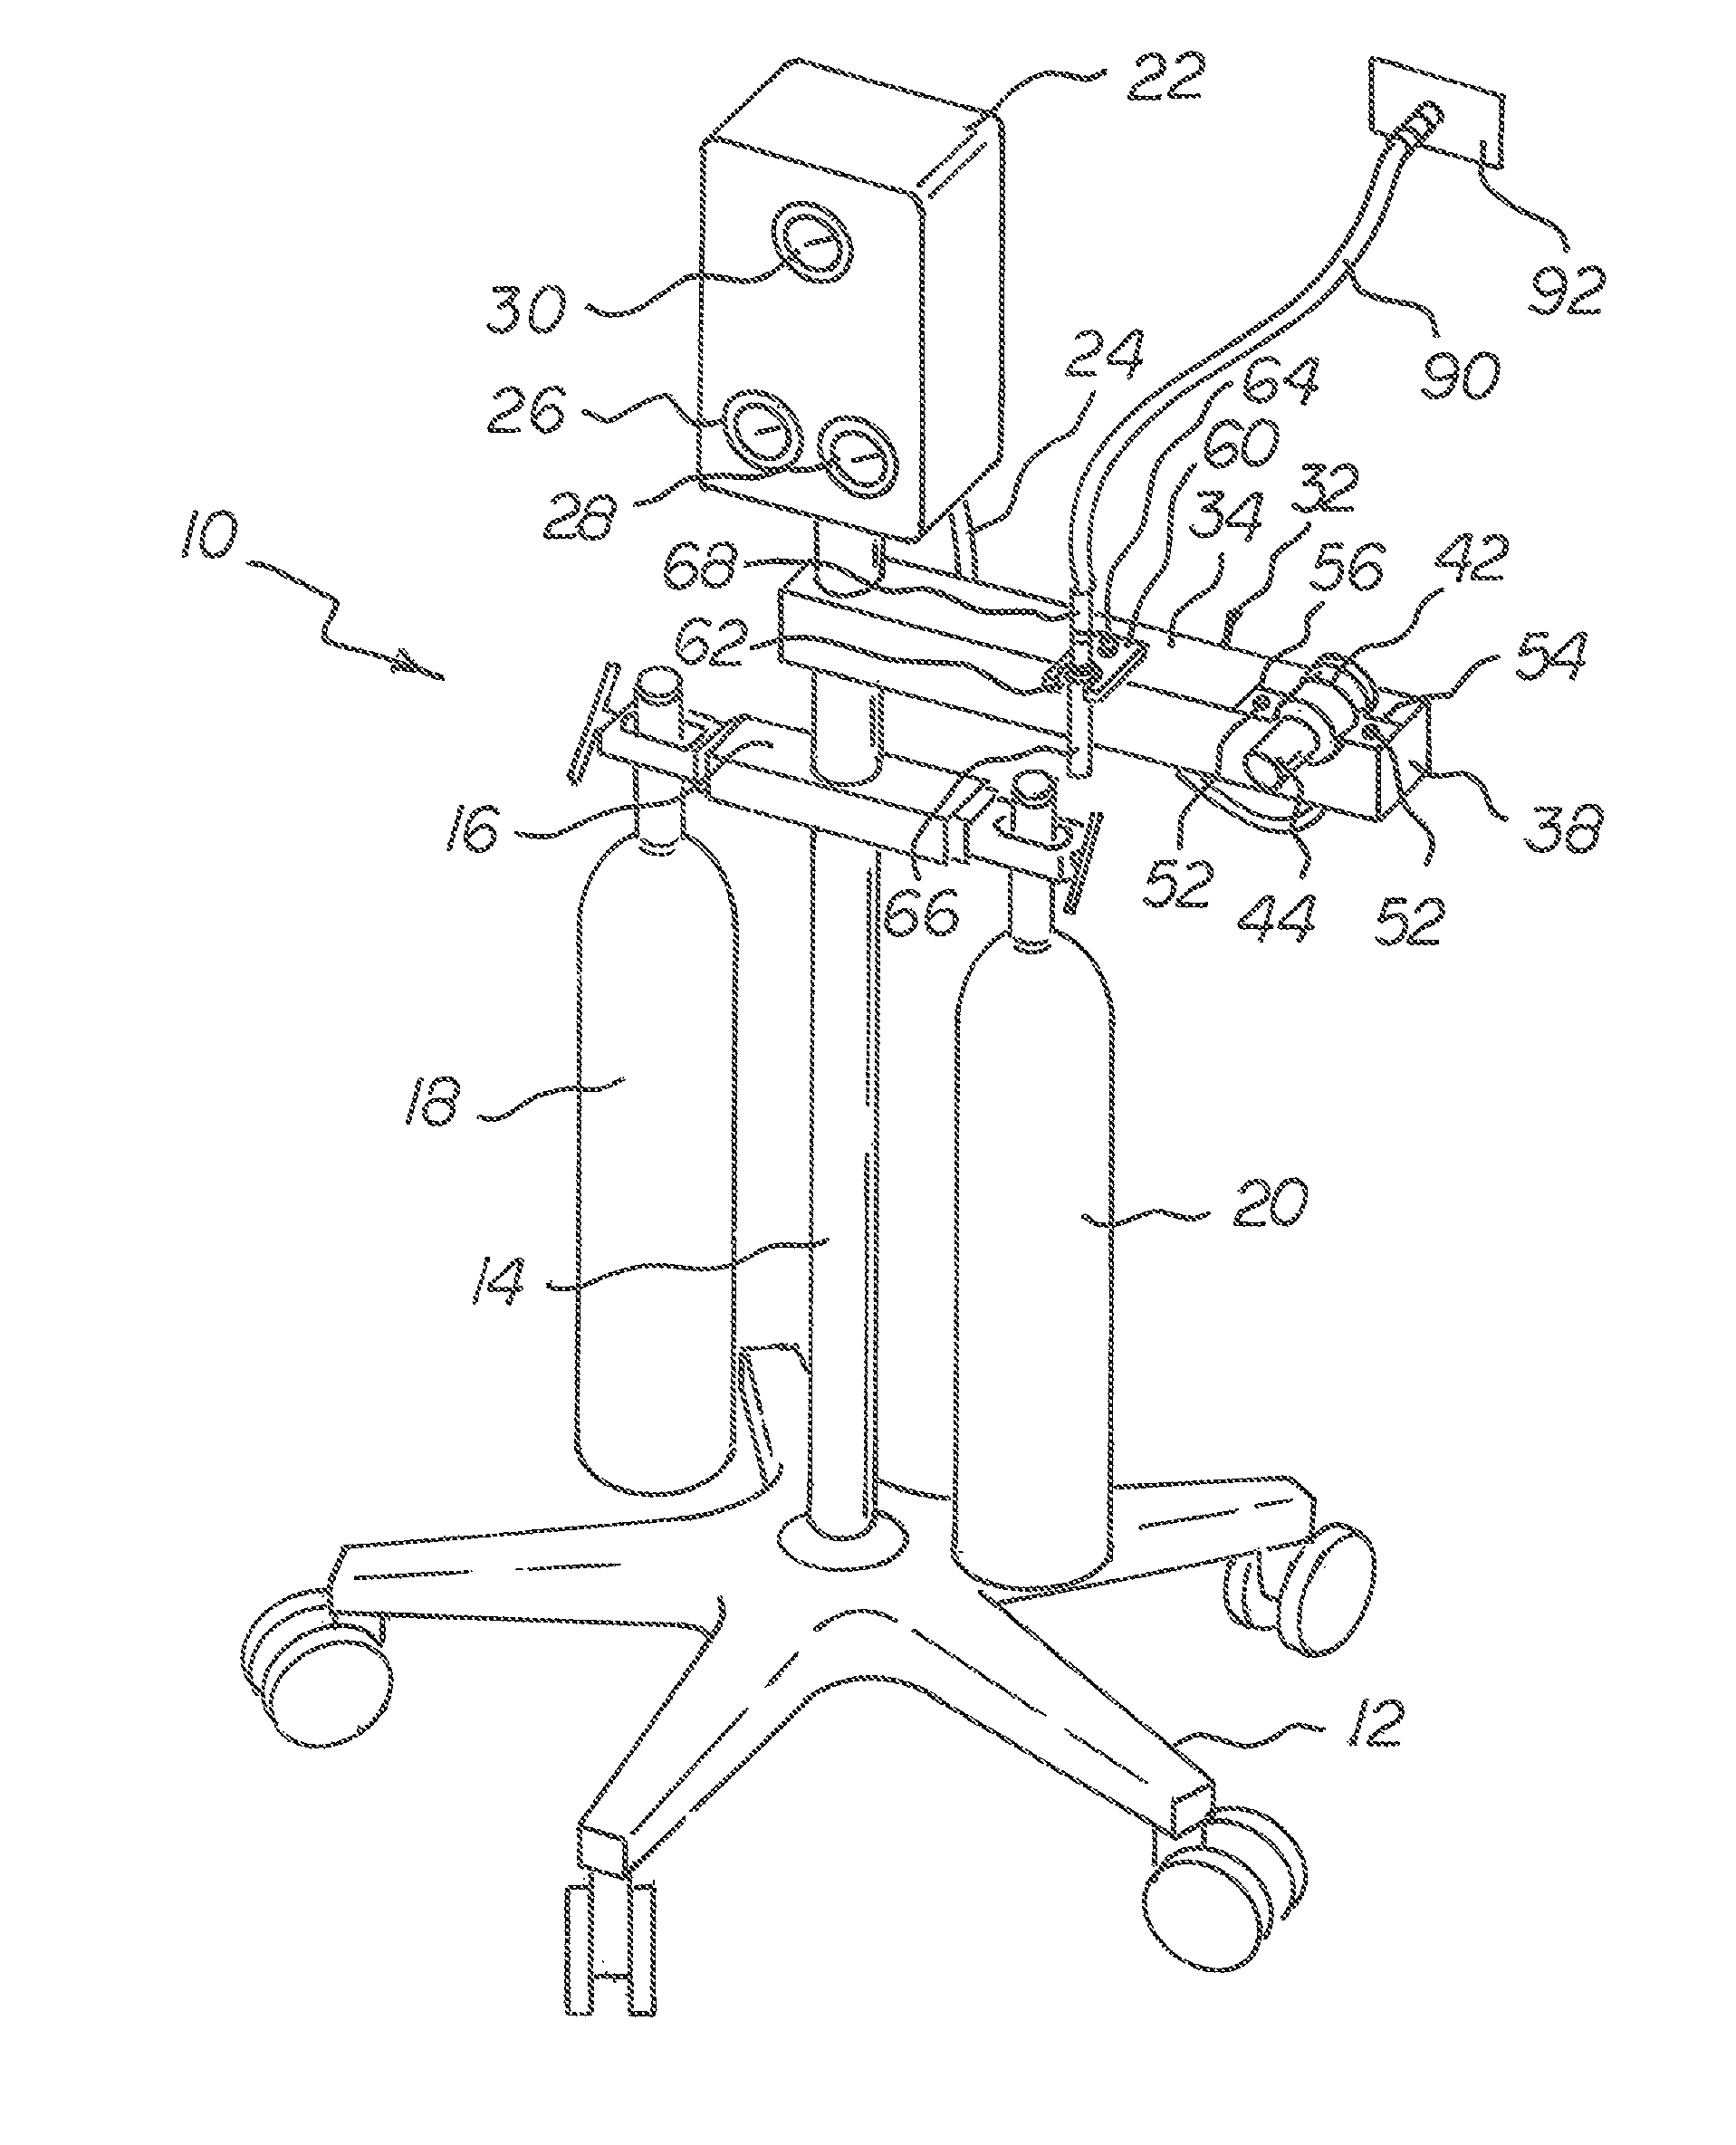 Demand anesthetic gas delivery system with disposable breathing and scavenging circuit